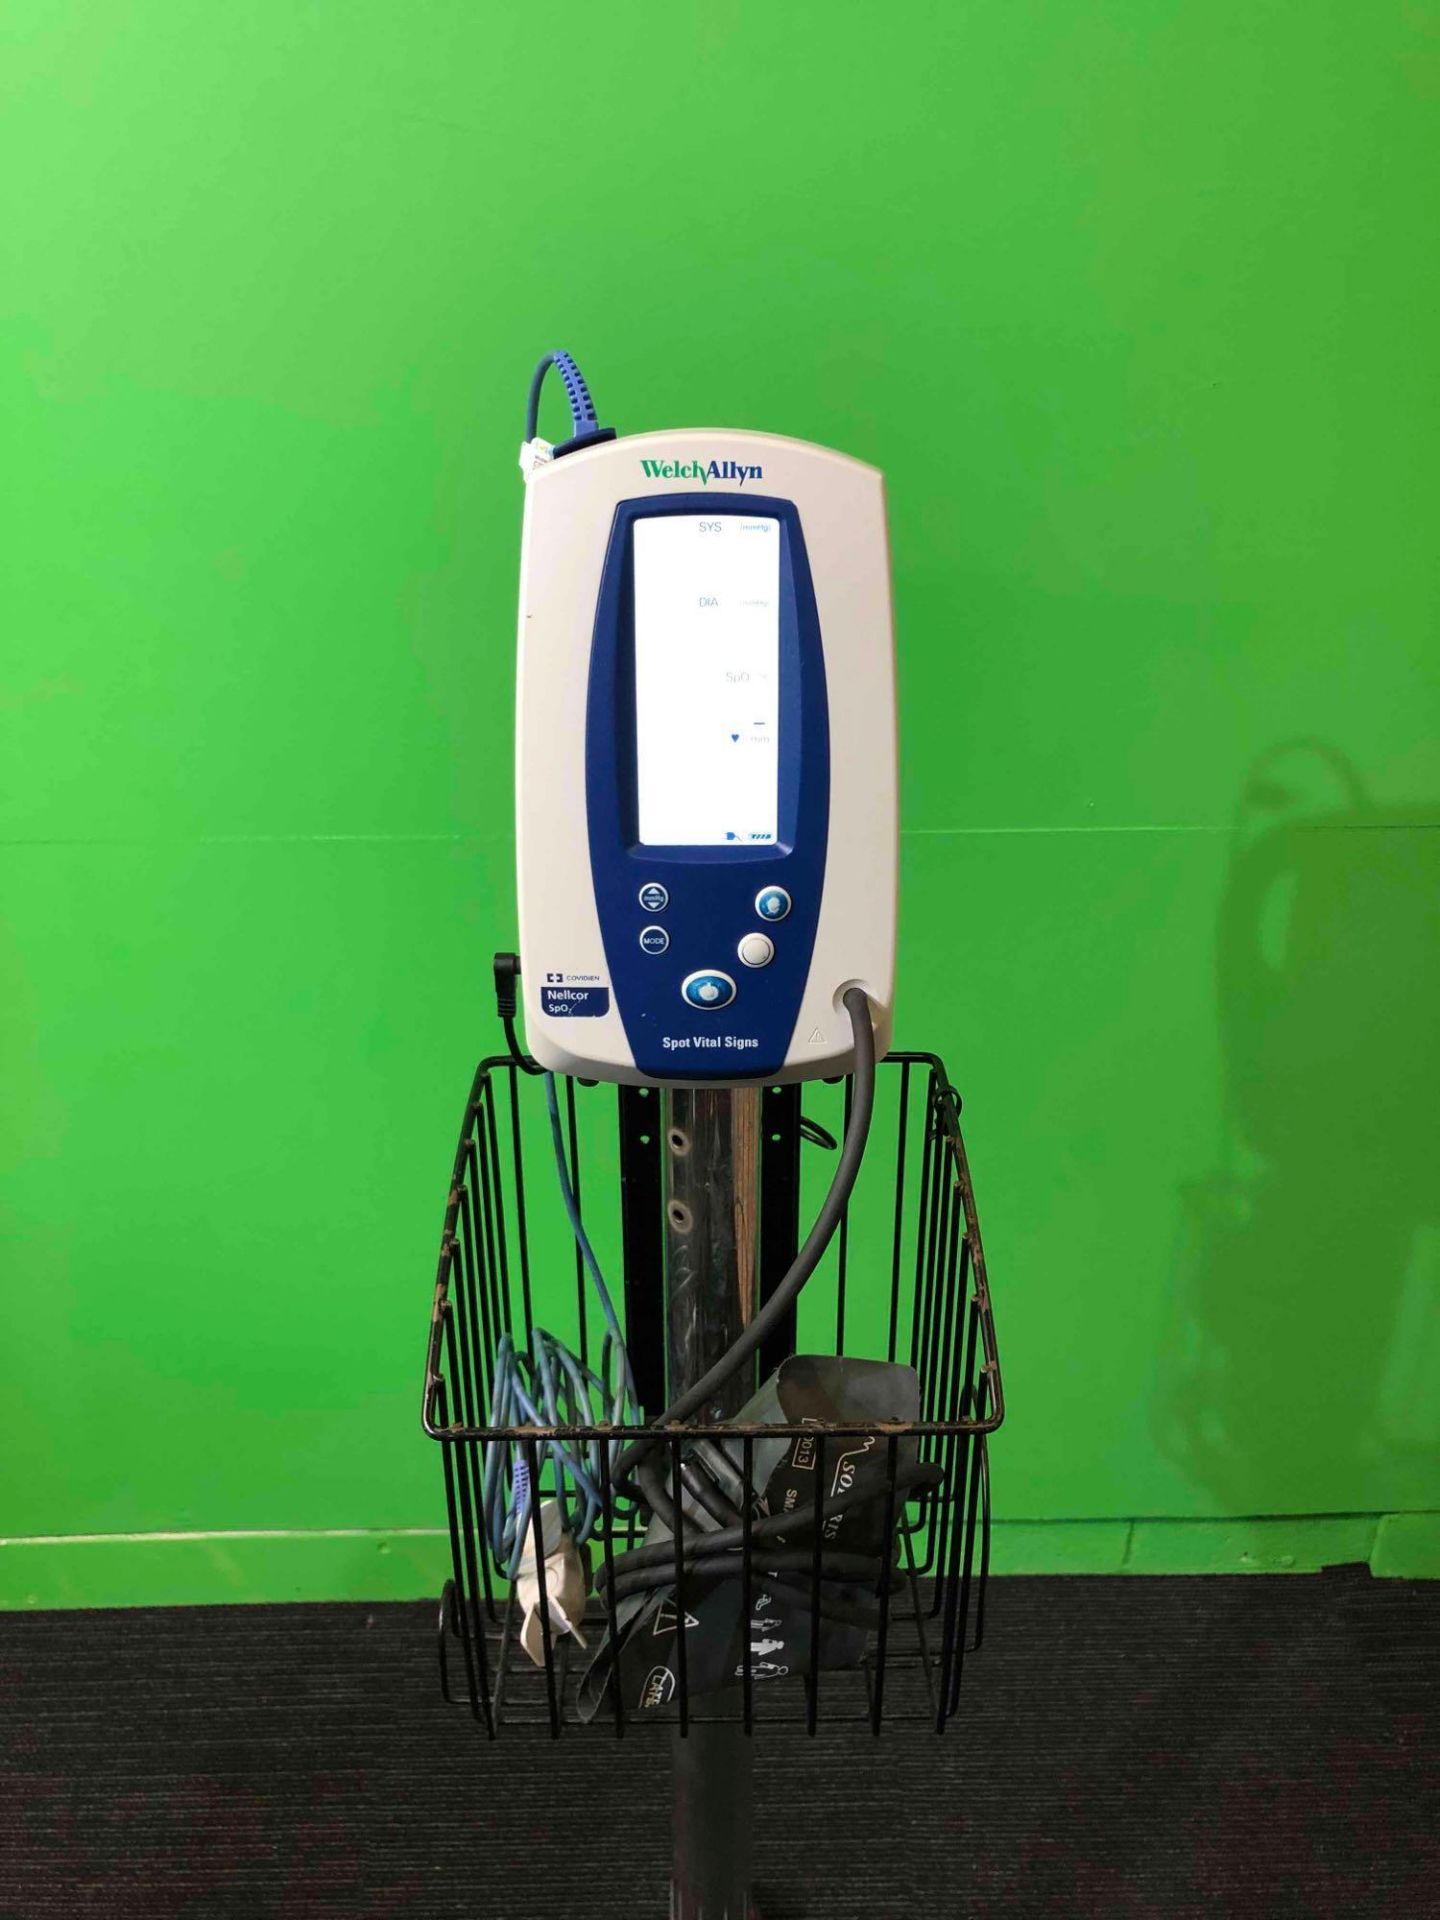 Welch Allyn Vital Signs Monitor on roll stand x 2 (Powers up?) - Image 2 of 4